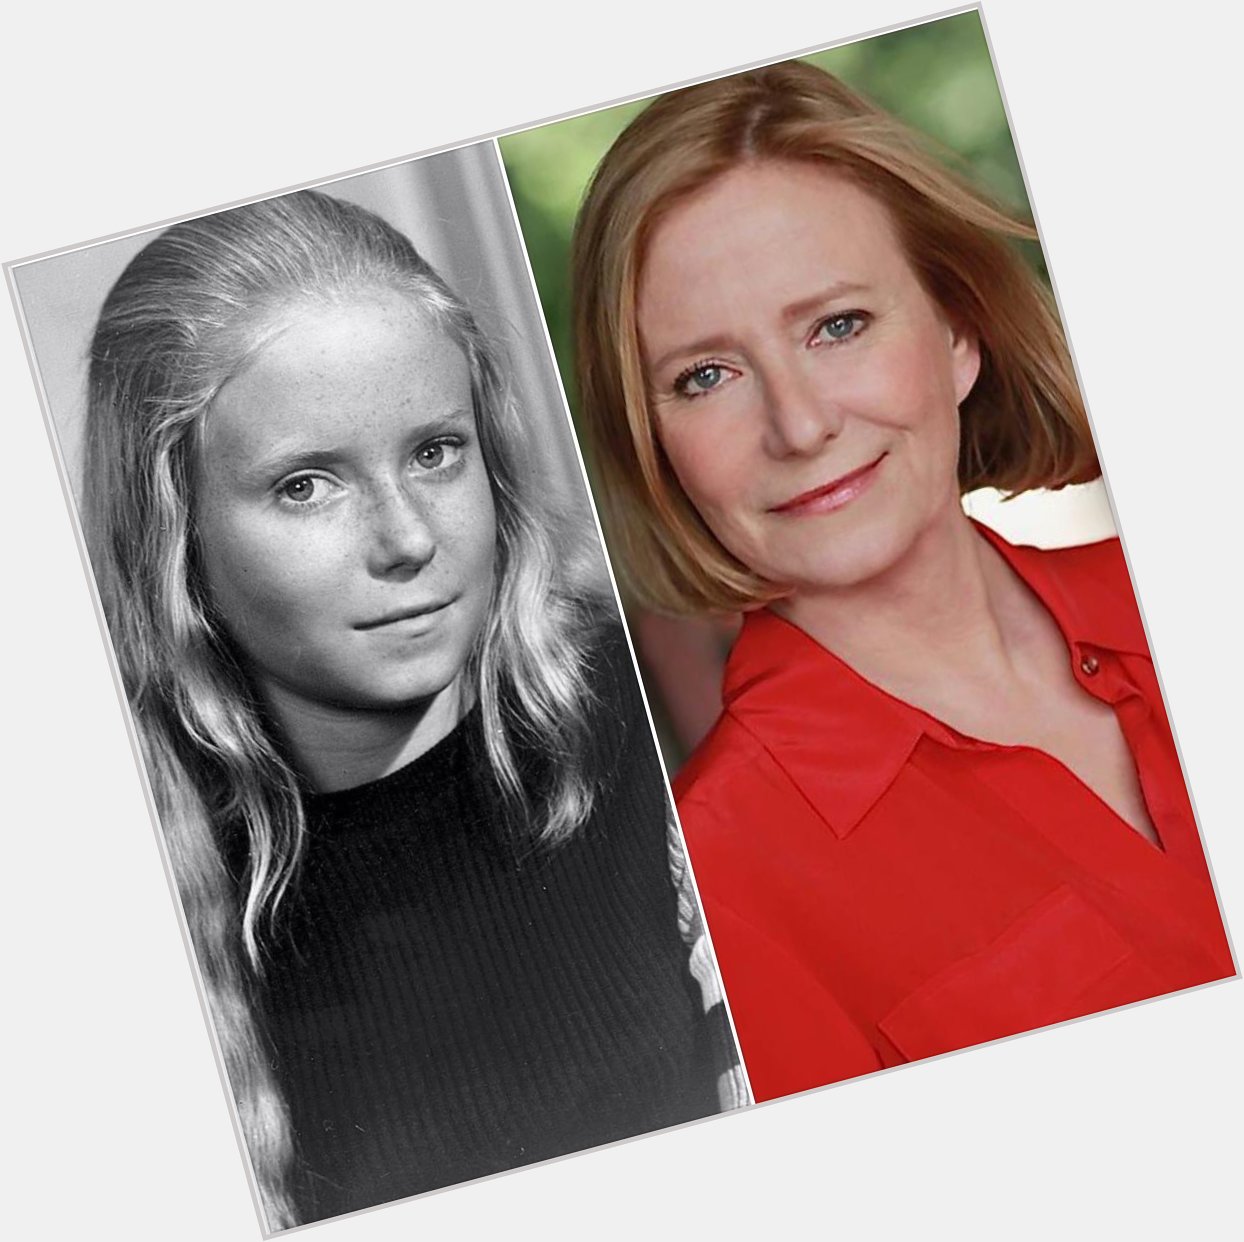 Happy birthday, Eve Plumb!

Jan from THE BRADY BUNCH is 61 today 